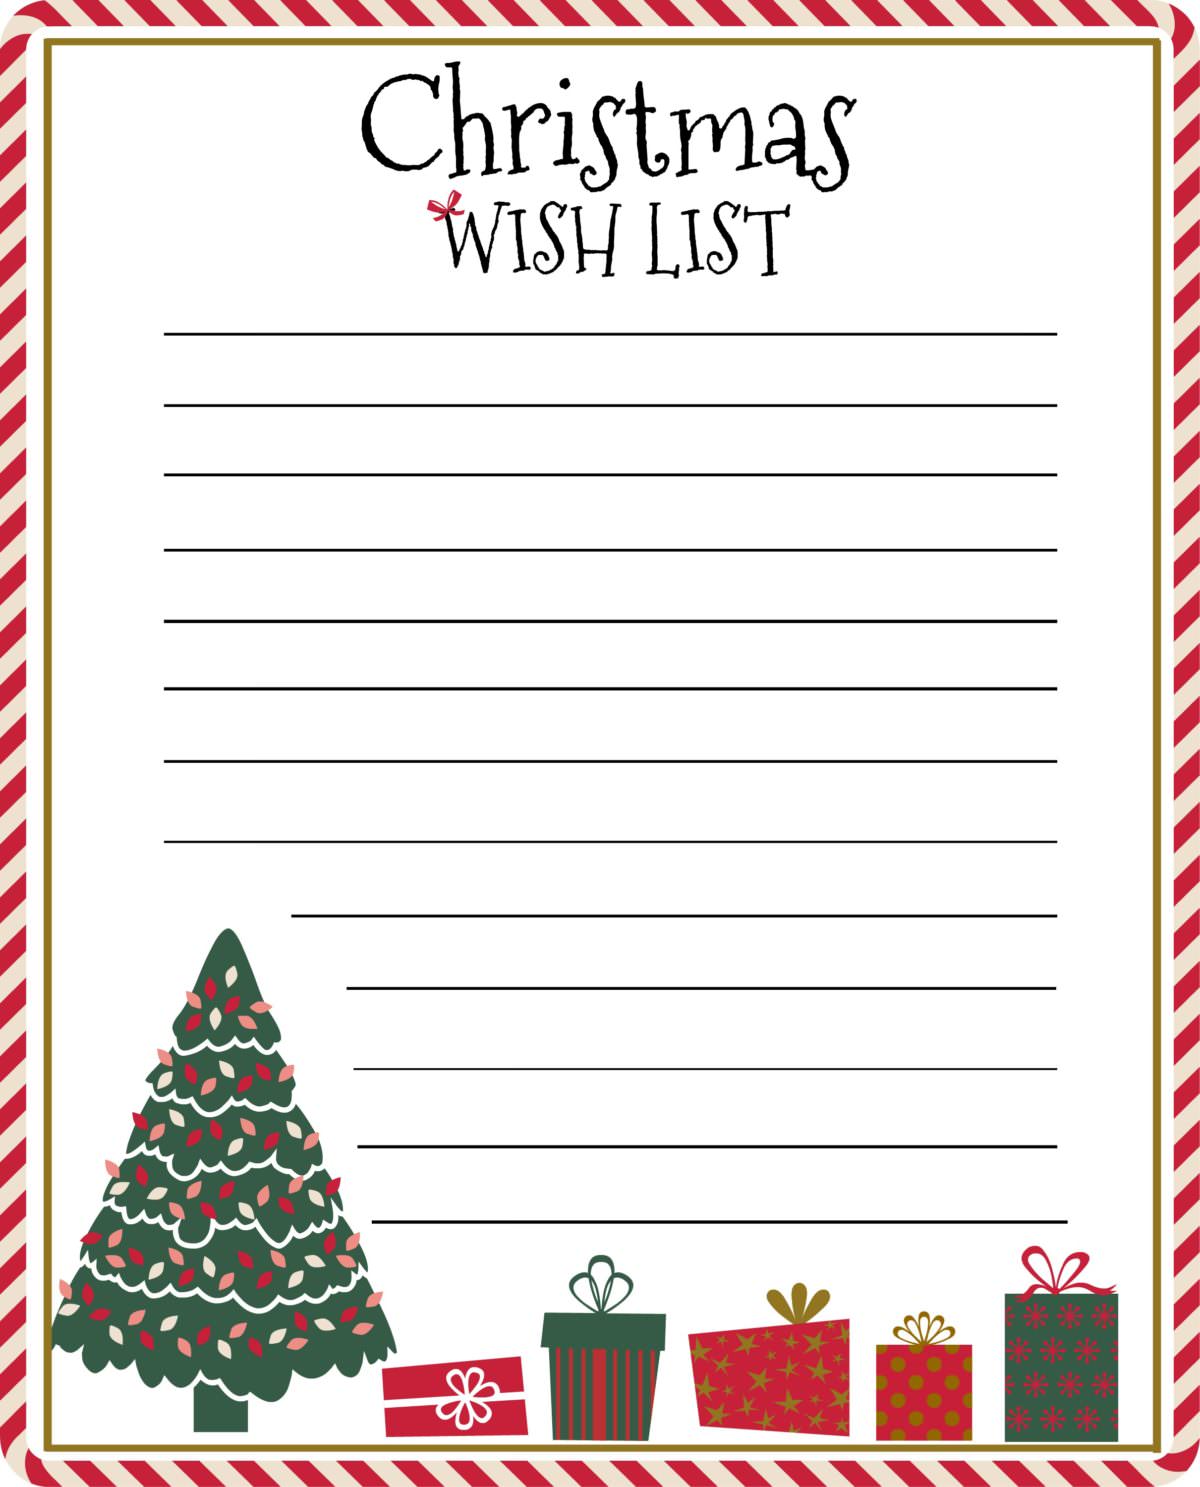 Free wish list printable for easy Cyber Monday shopping My Mommy Style